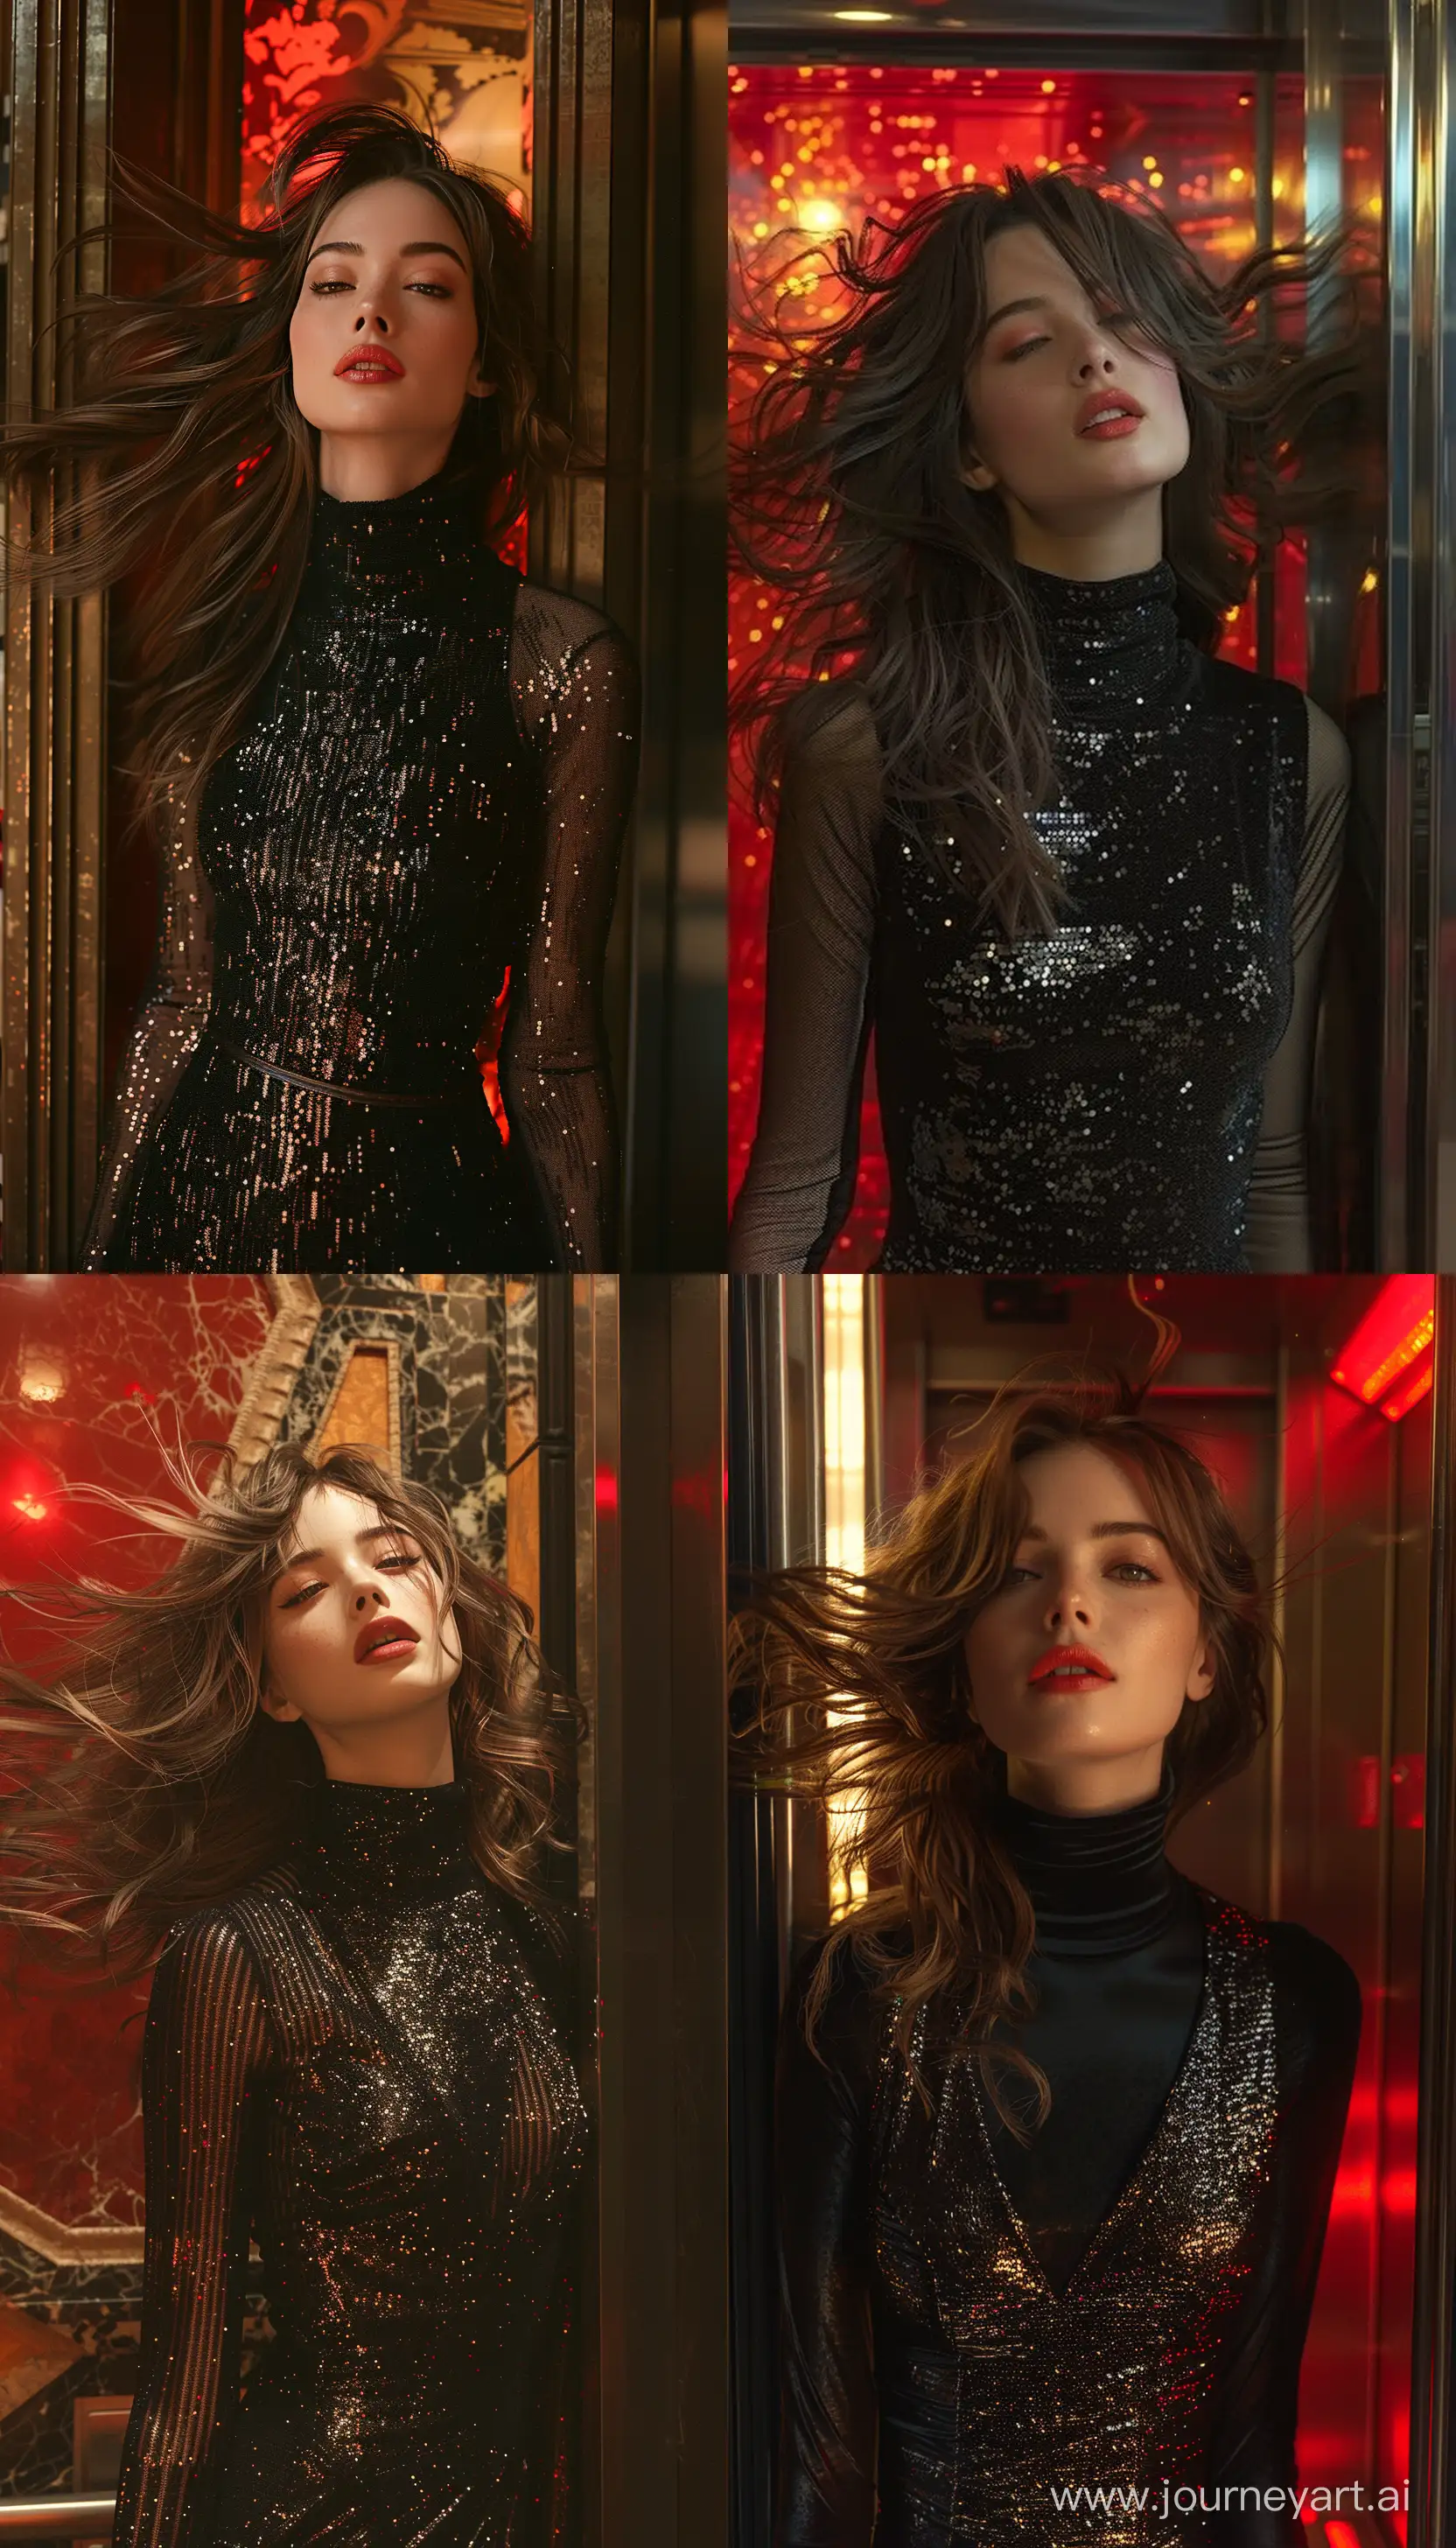 Captivating-Woman-in-Black-Sequin-Dress-by-Luxurious-Elevator